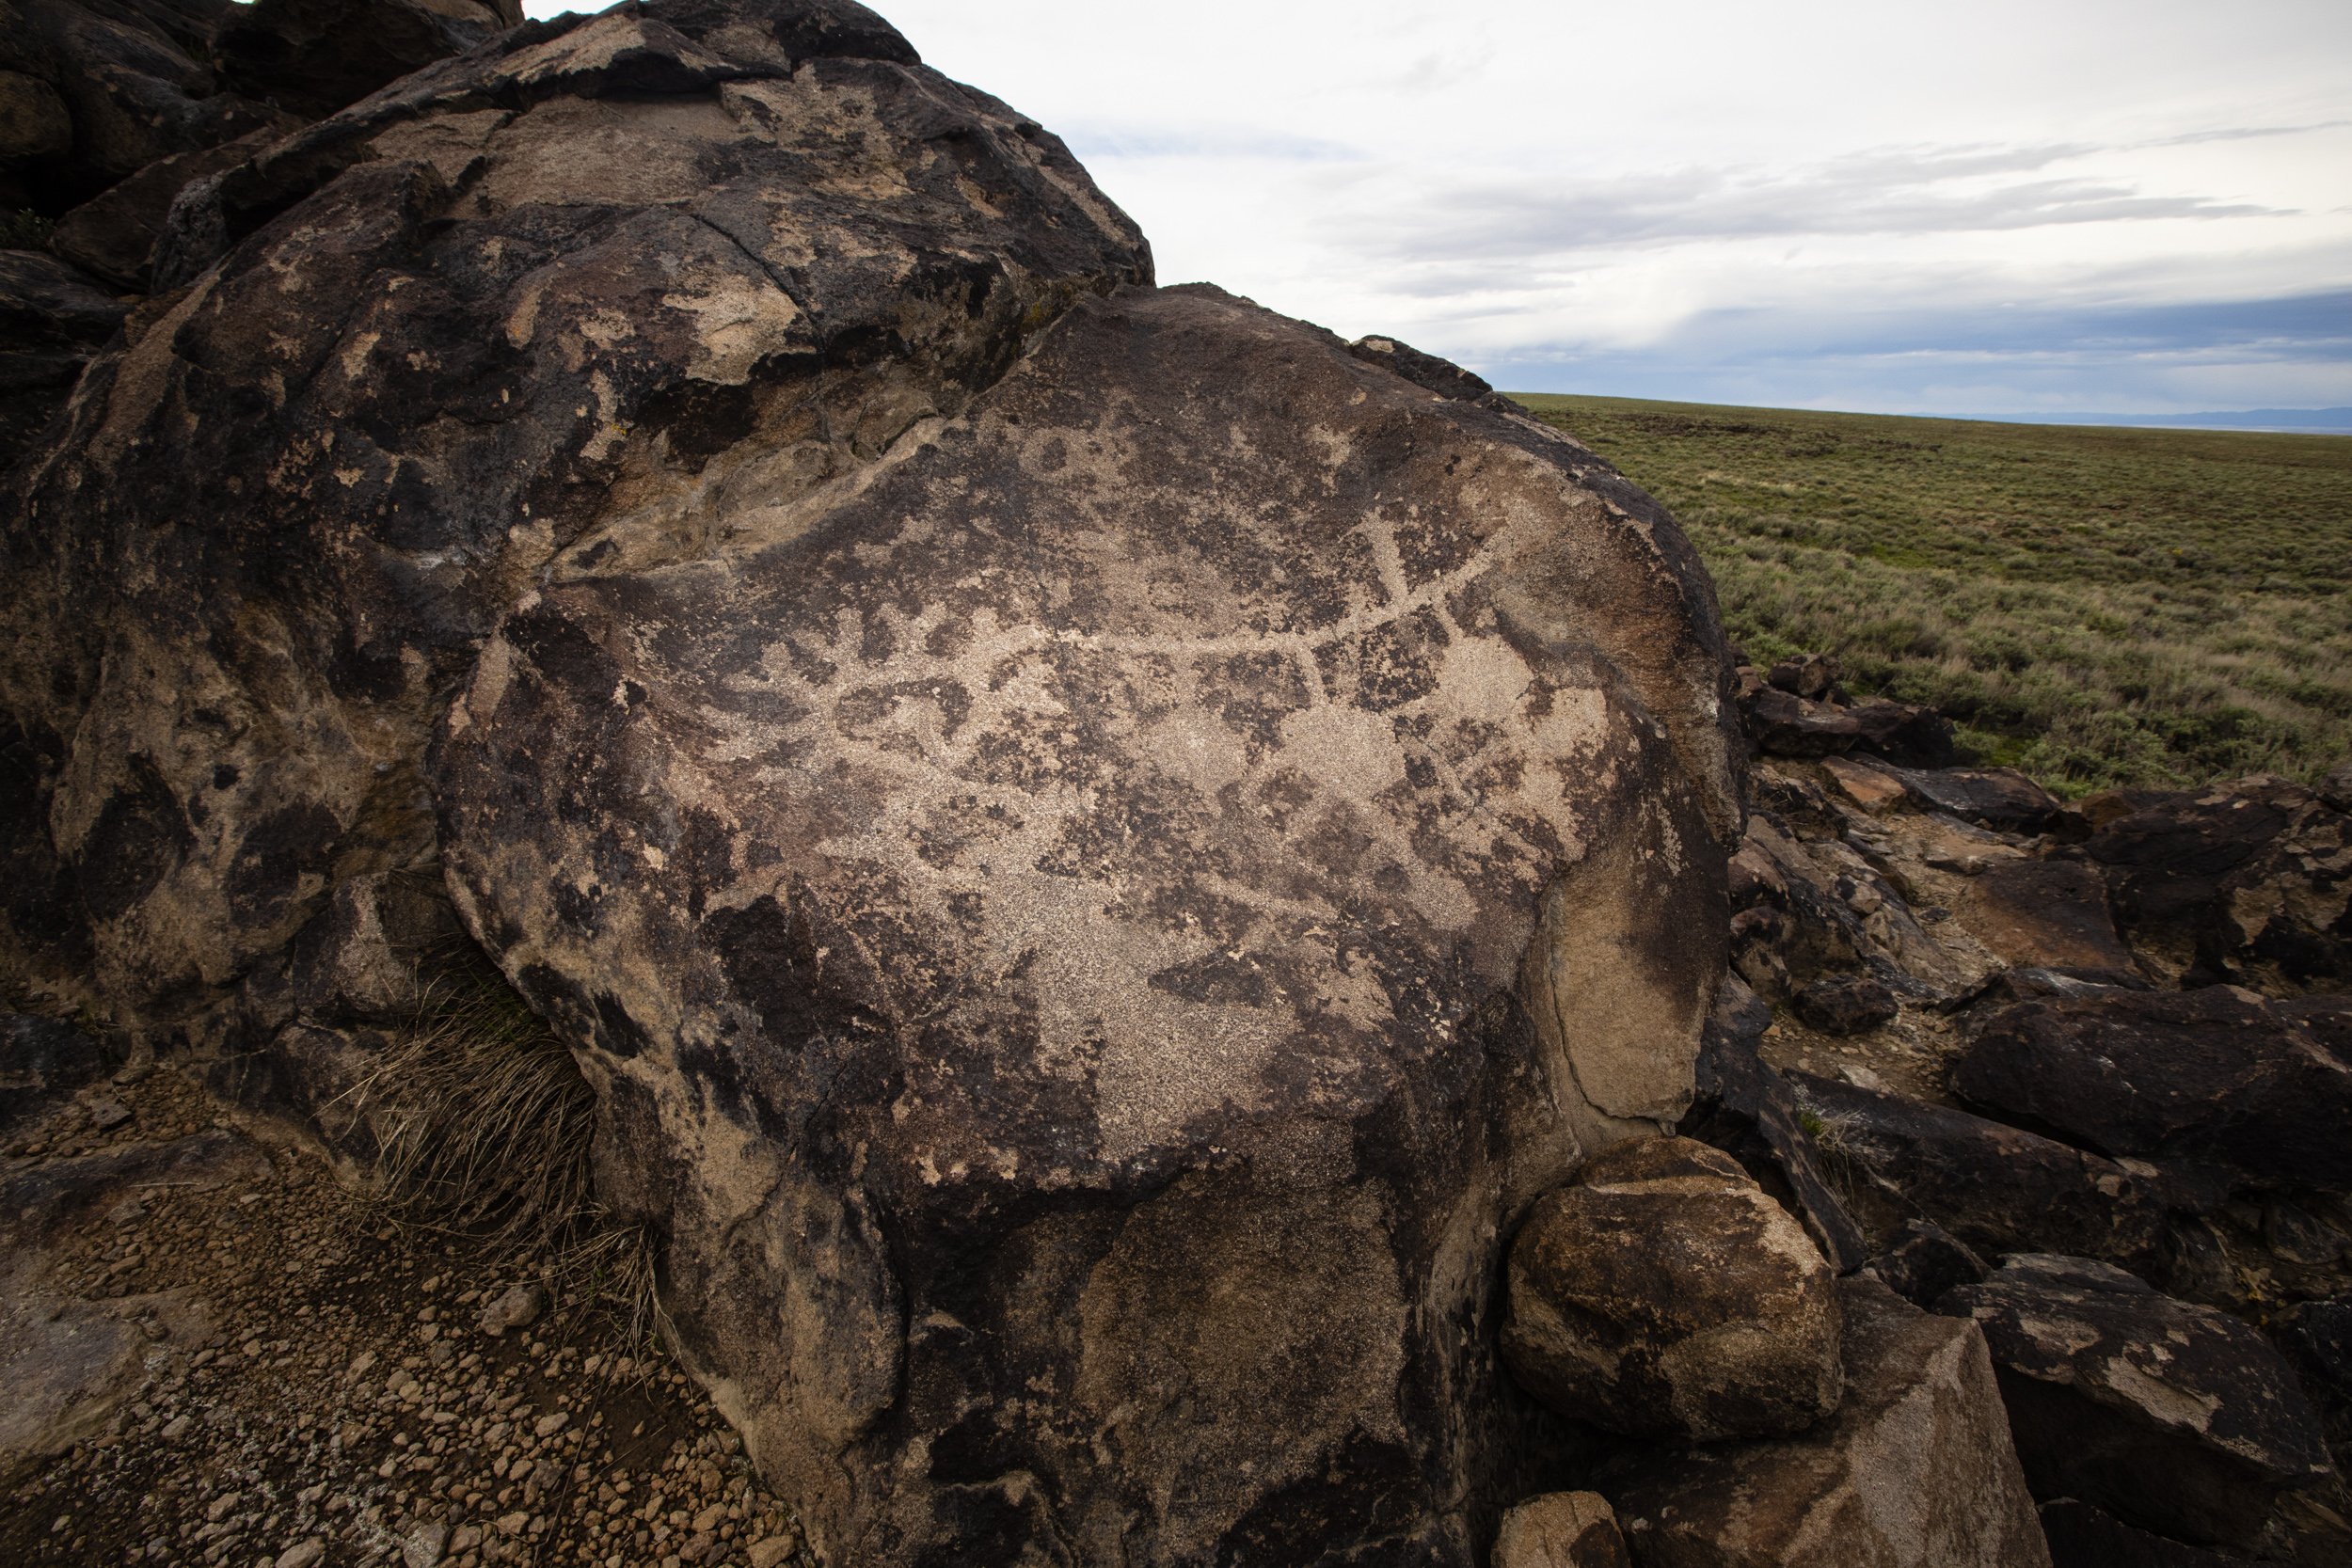 Ancient petroglyphs in the traditional territory of the Northern Pauite people.